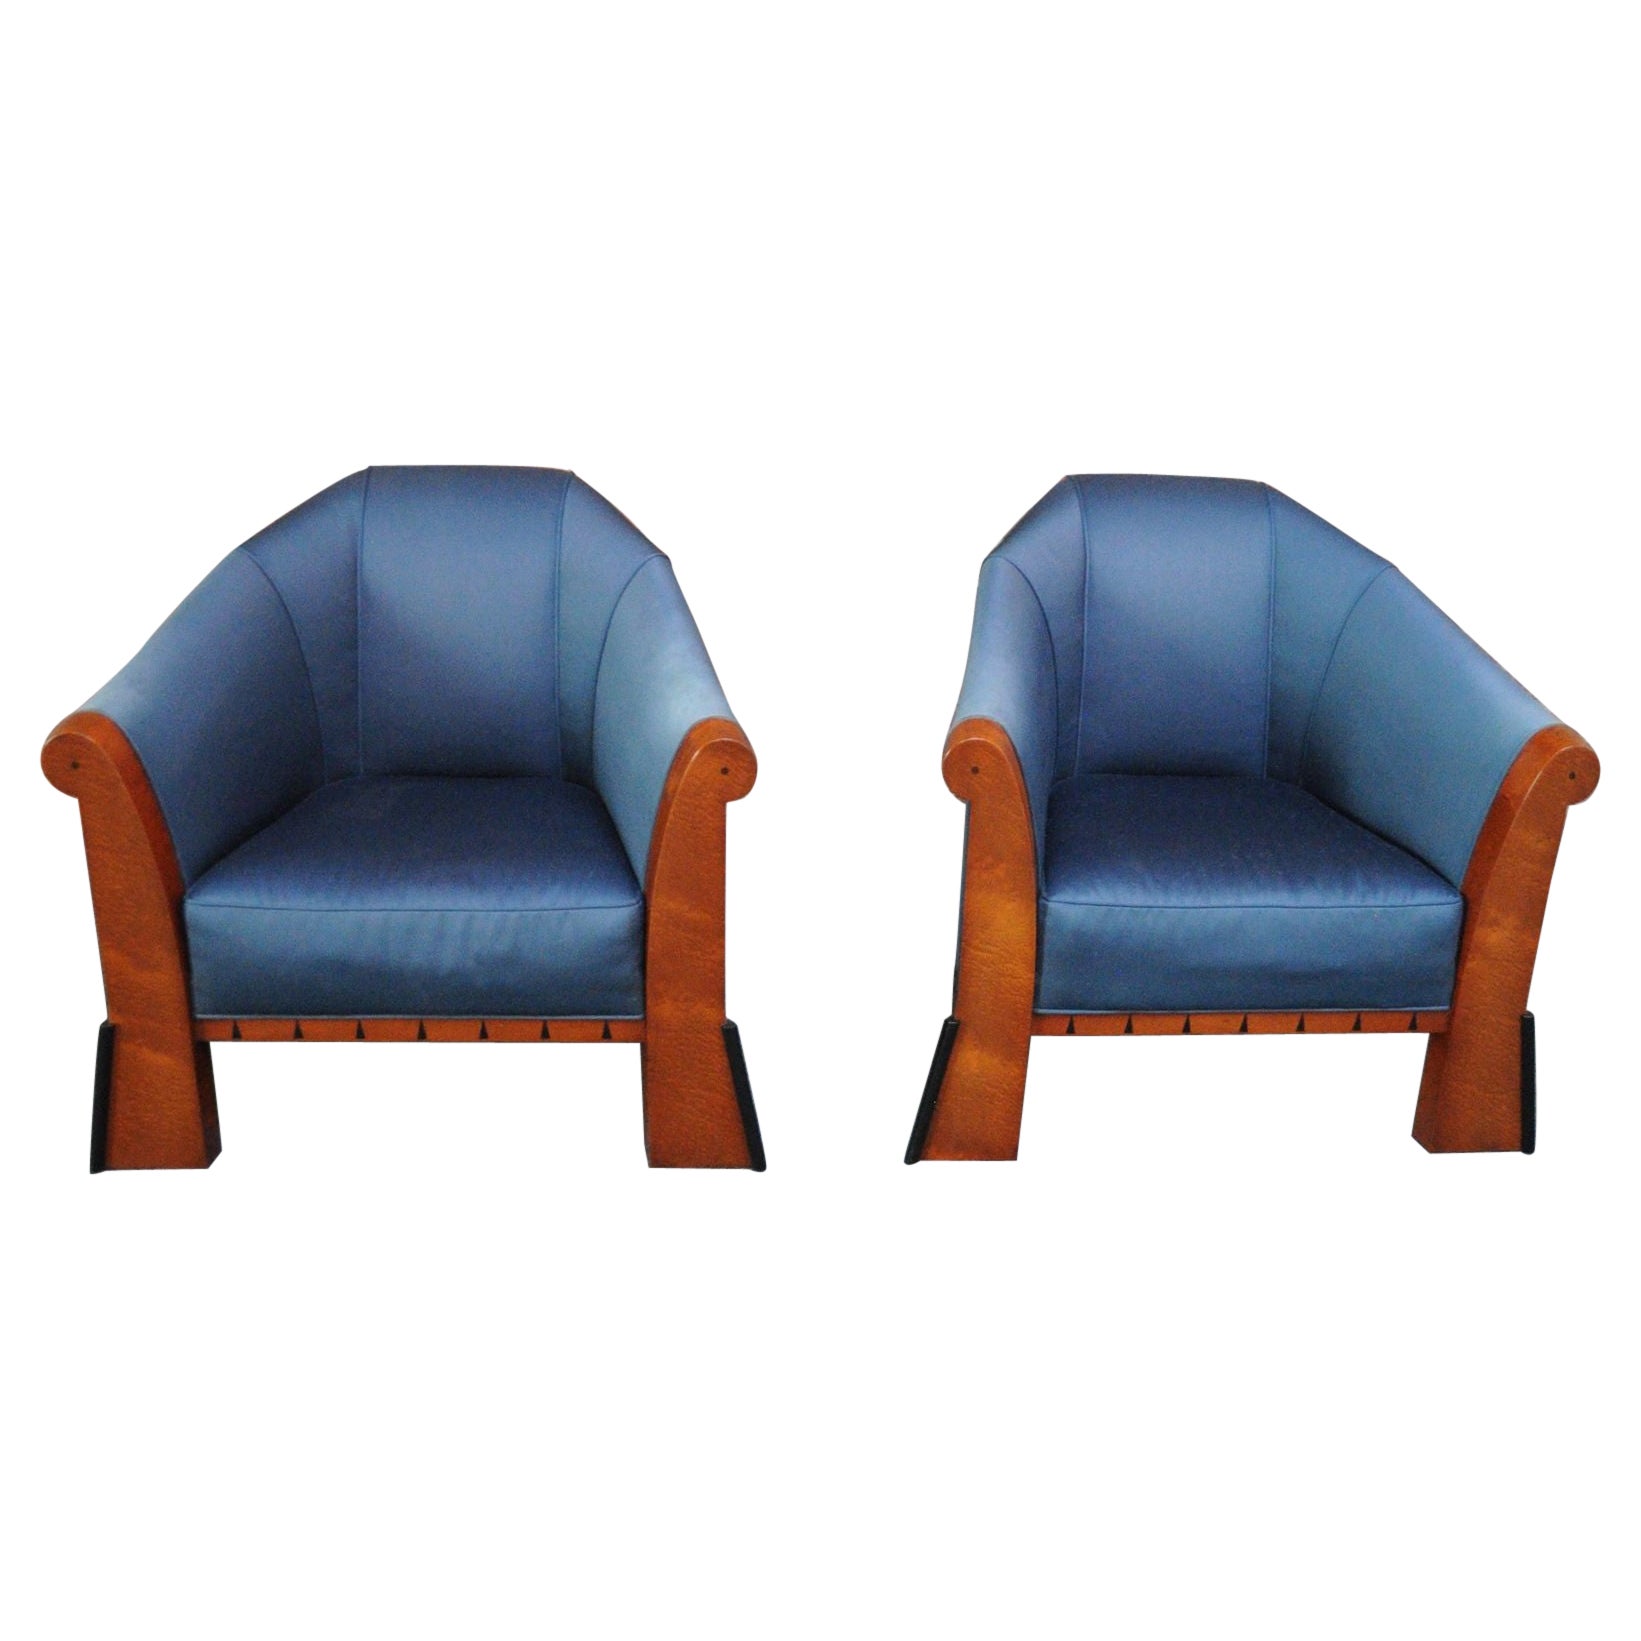 Pair of Postmodern Club Chairs in Stained Birdseye Maple by Michael Graves For Sale